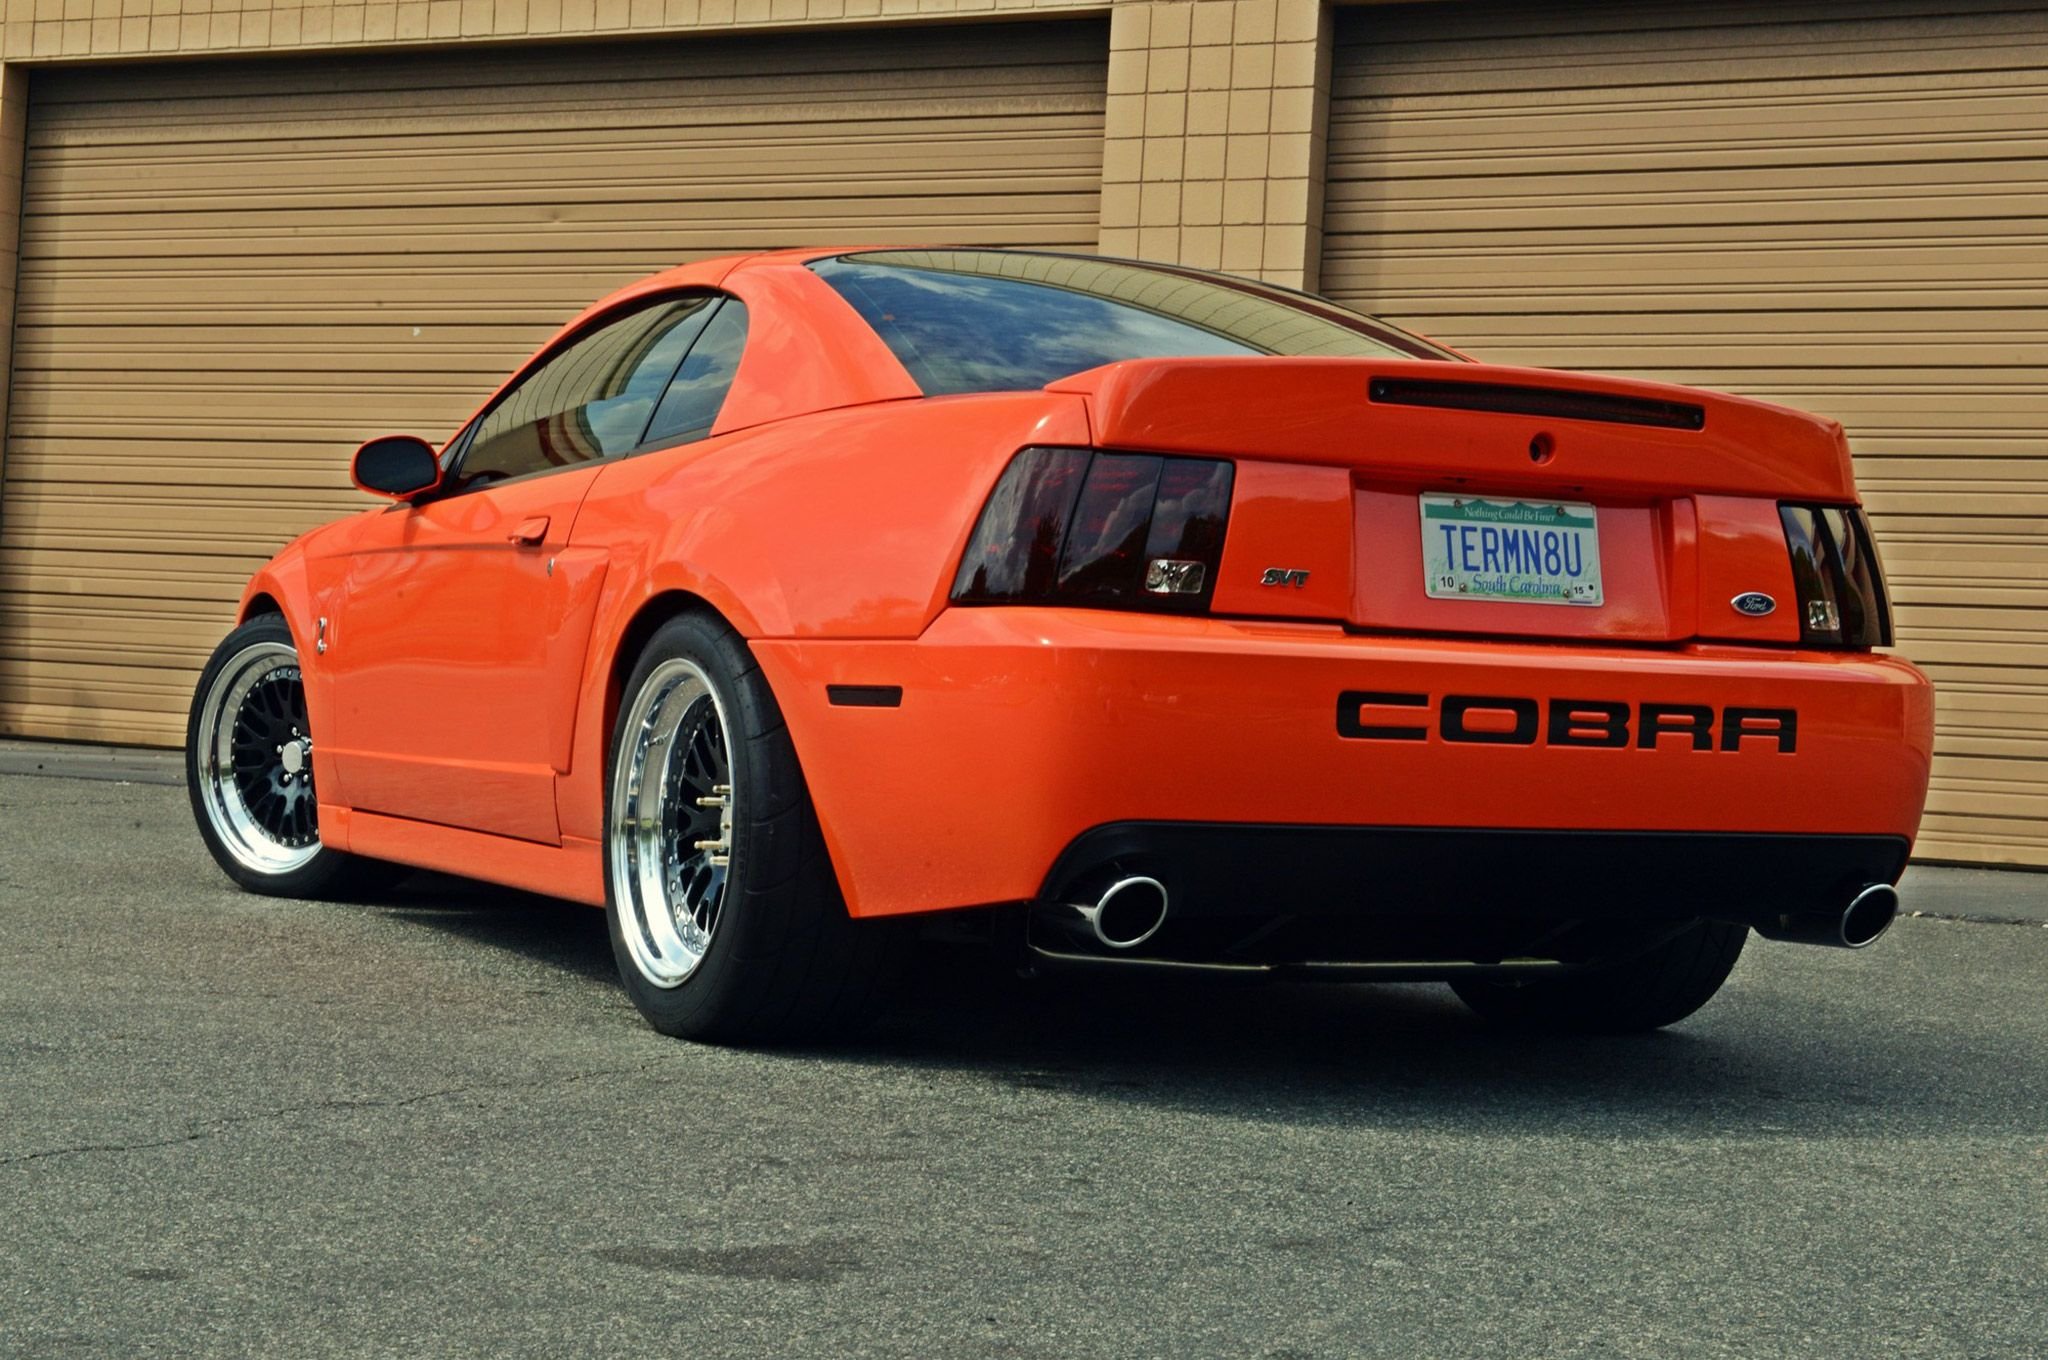 2004, Ford, Mustang, Gt, Cobra, Competition, Super, Street, Pro, Touring, Usa,  10 Wallpaper